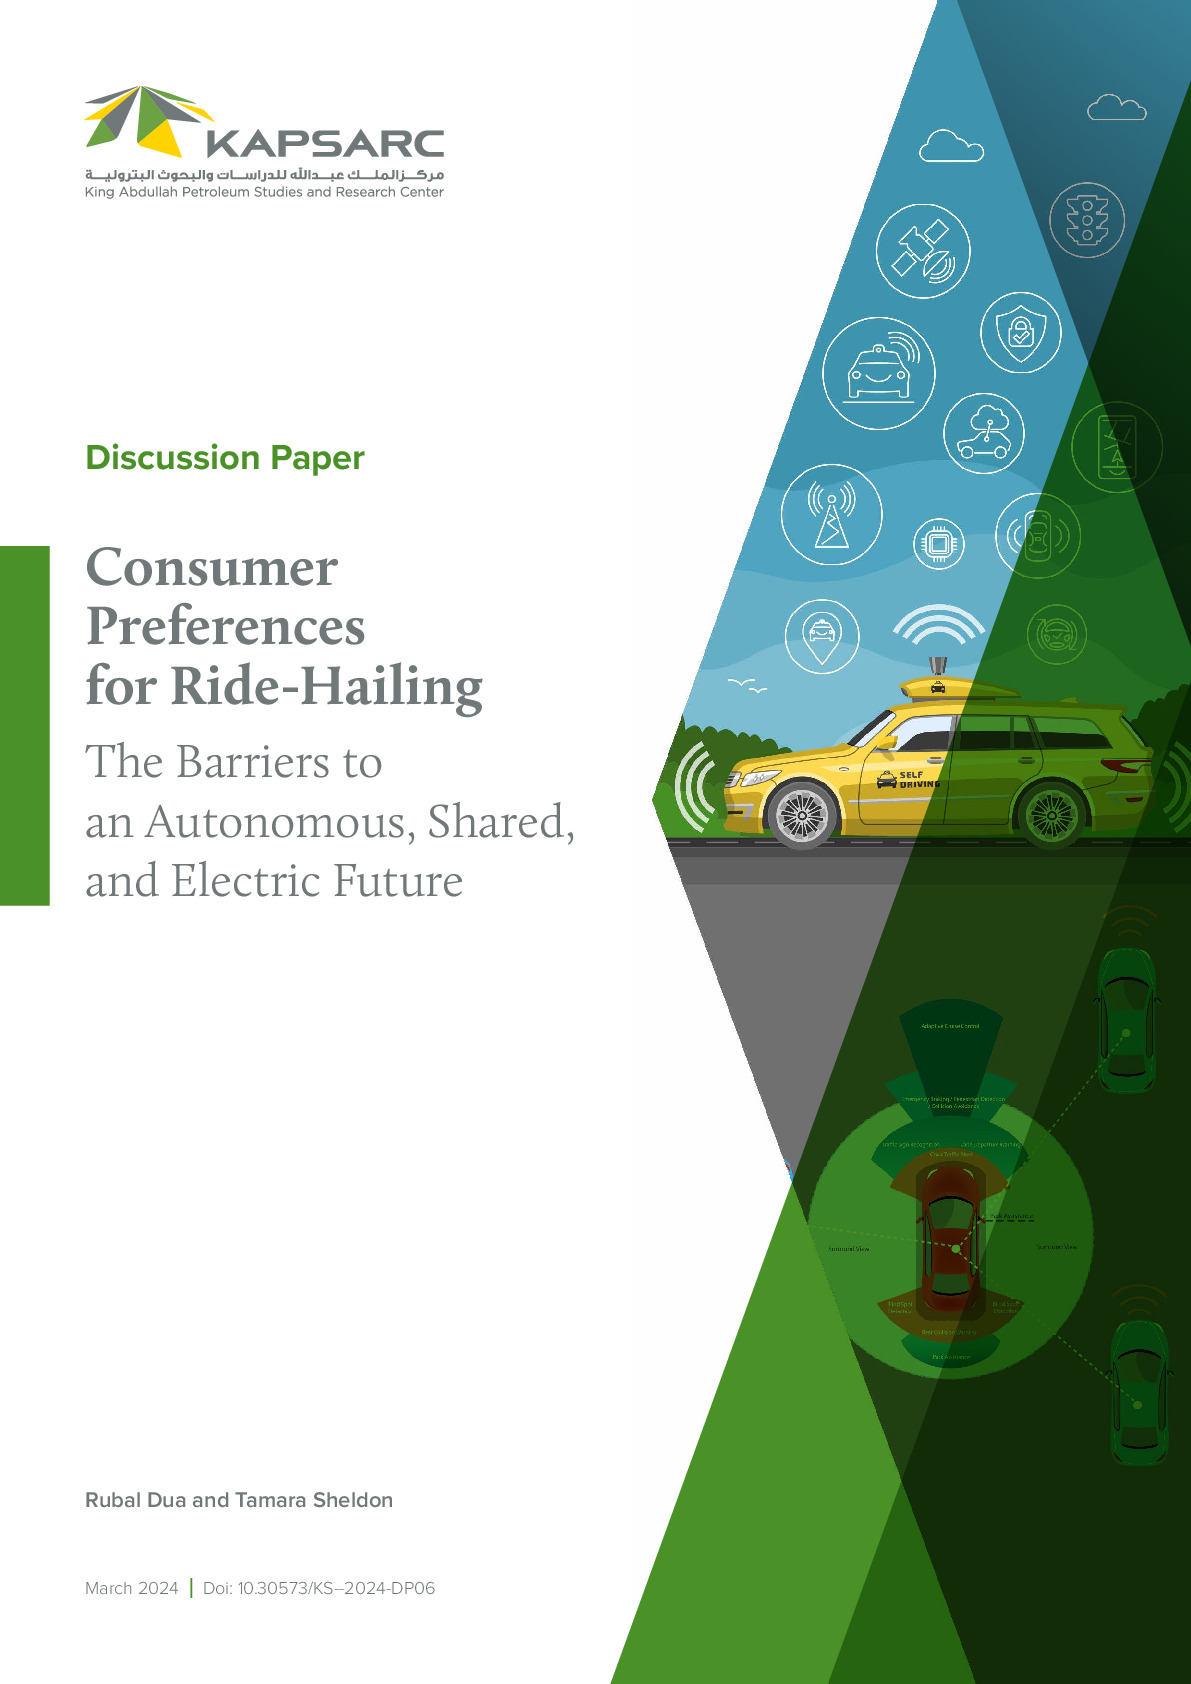 Consumer Preferences for Ride-Hailing: The Barriers to an Autonomous, Shared, and Electric Future